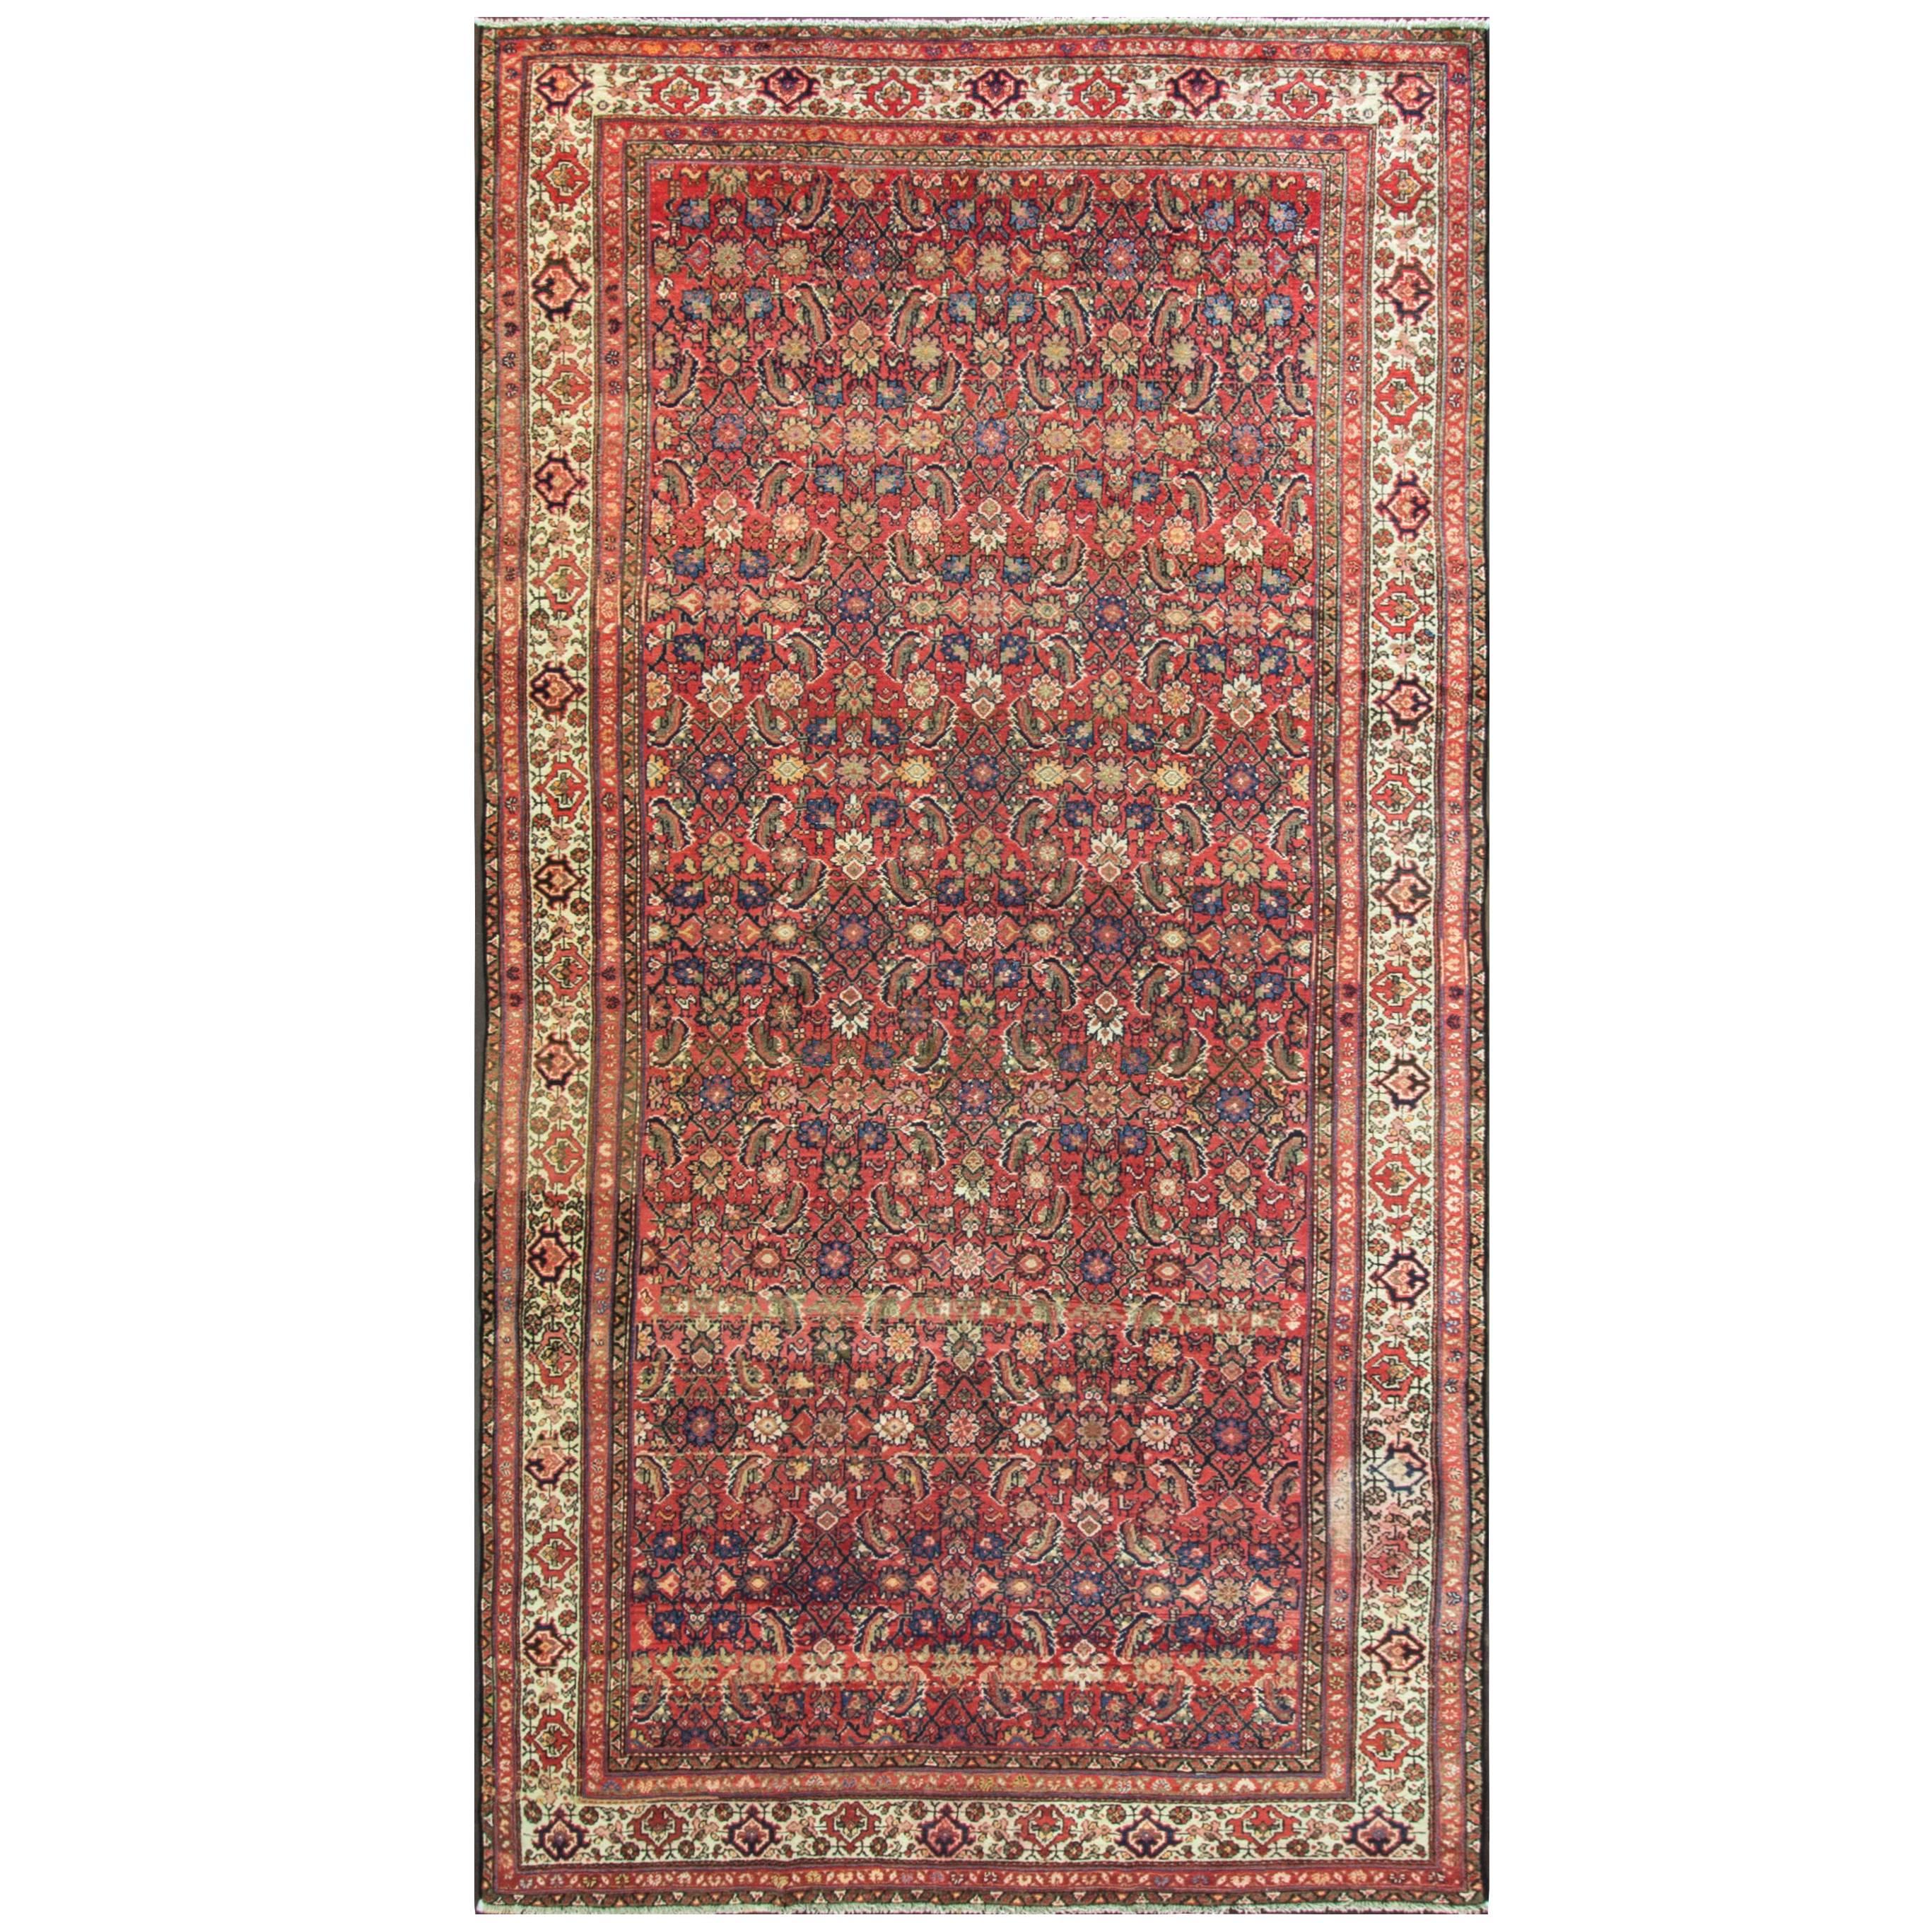 Antique Persian Malayer Gallery Carpet